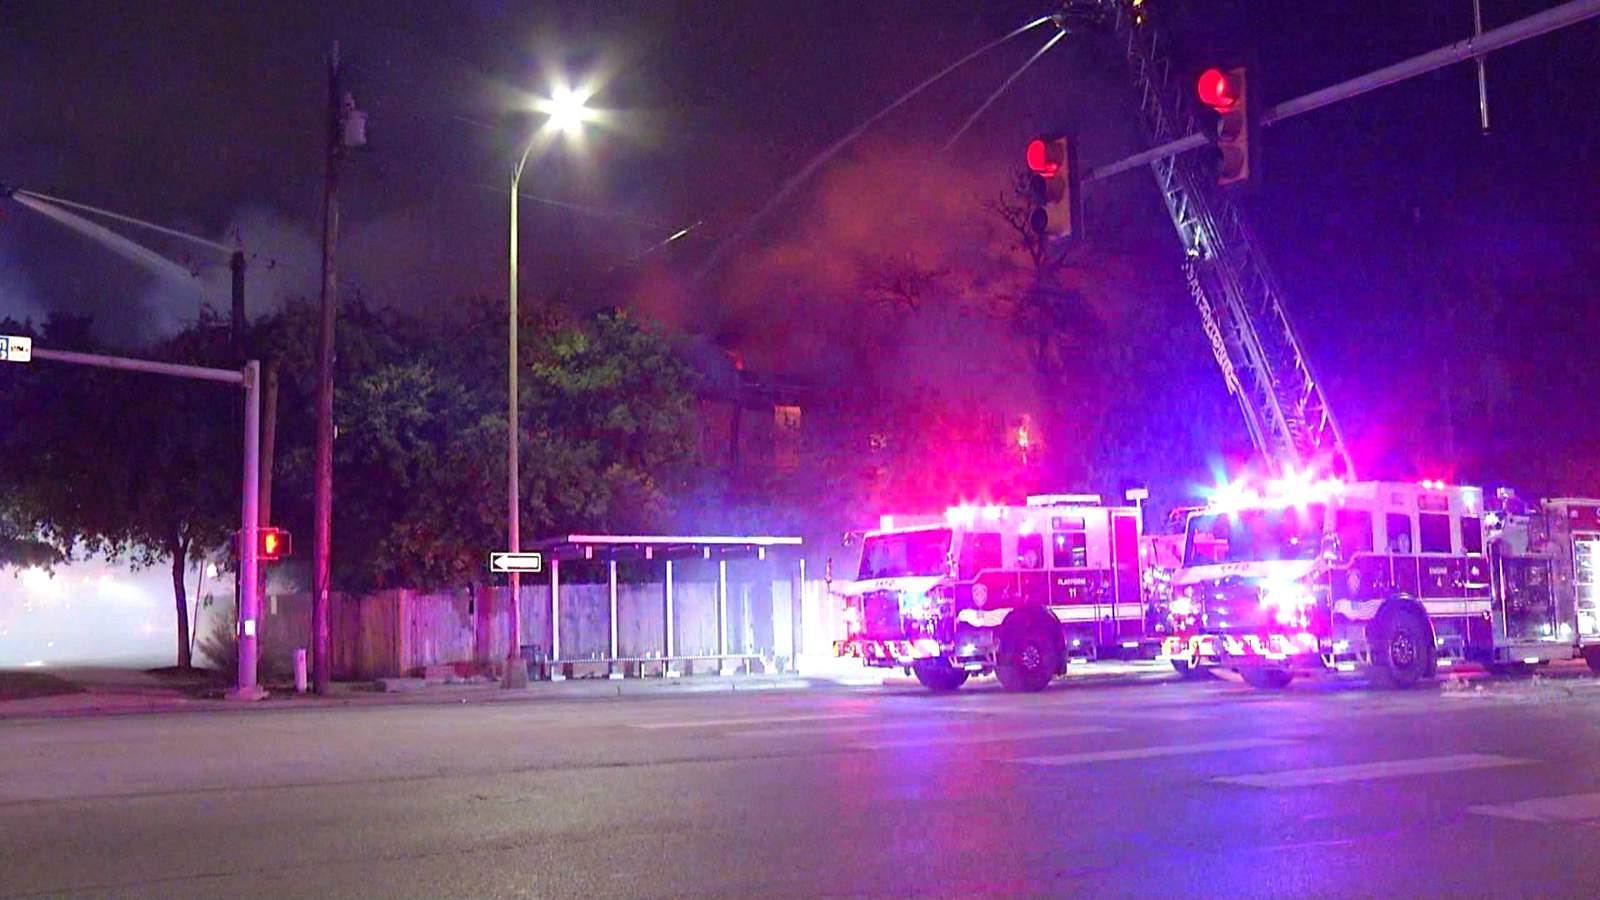 Firefighters extinguish fire at abandoned 2-story structure downtown